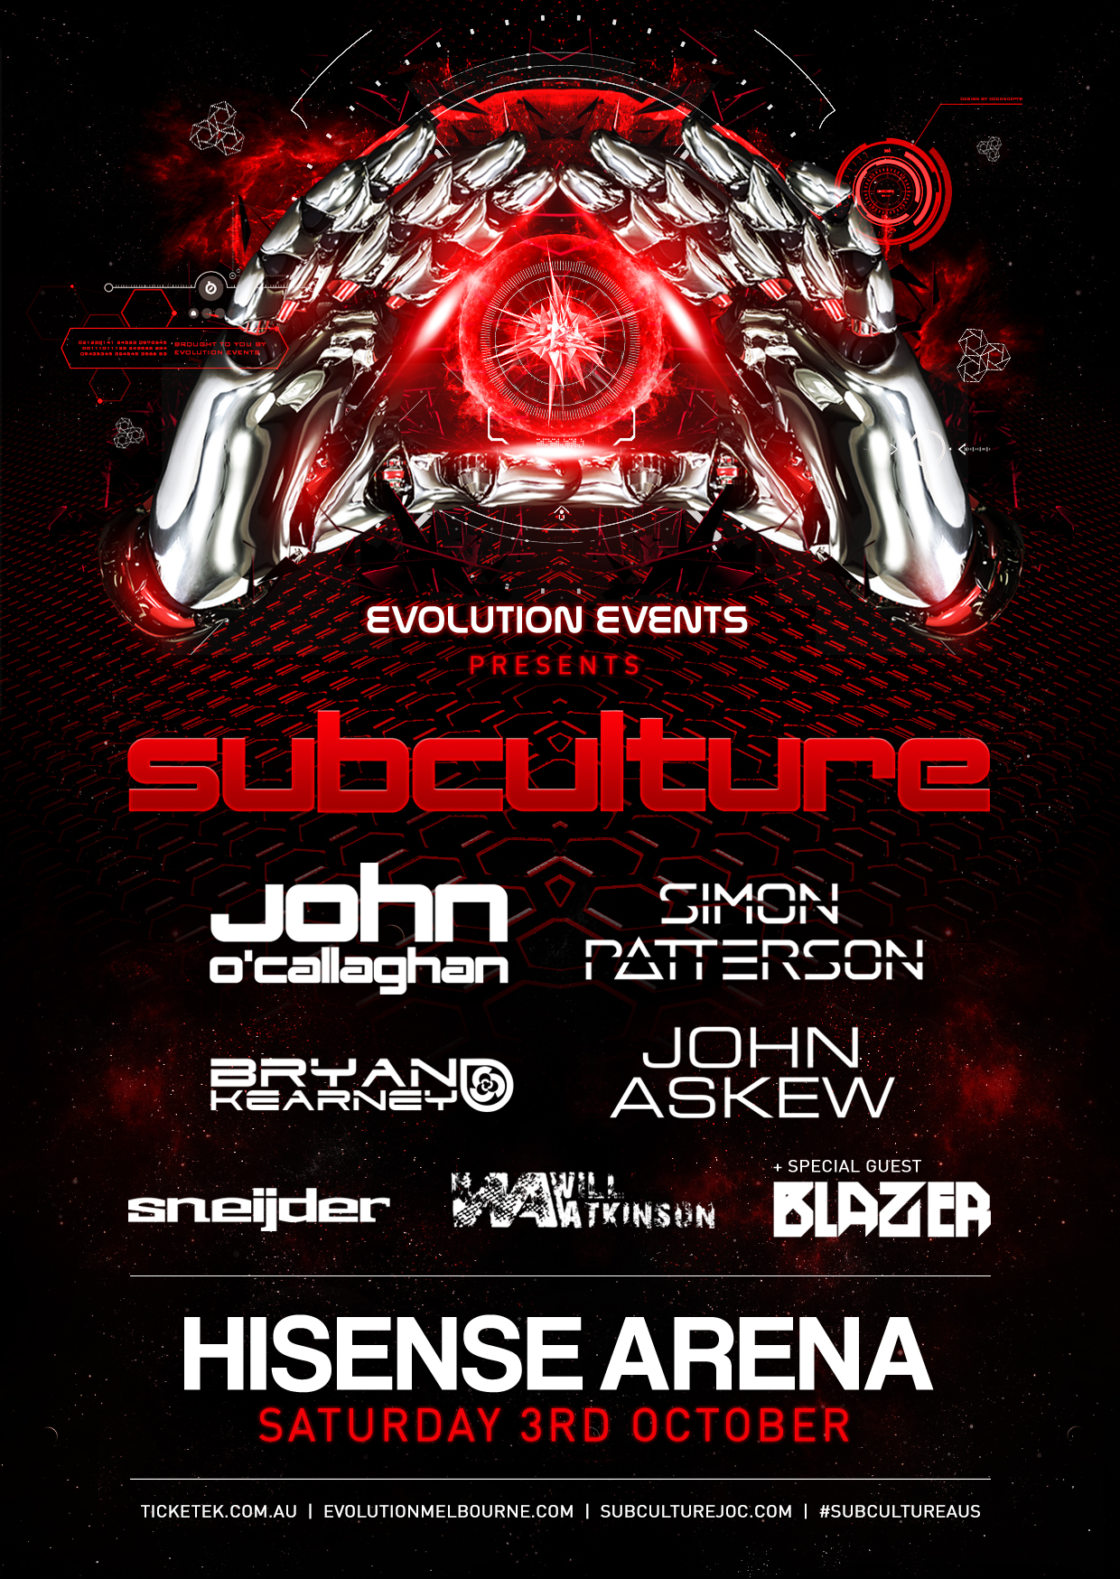 SUBCULTURE 2015